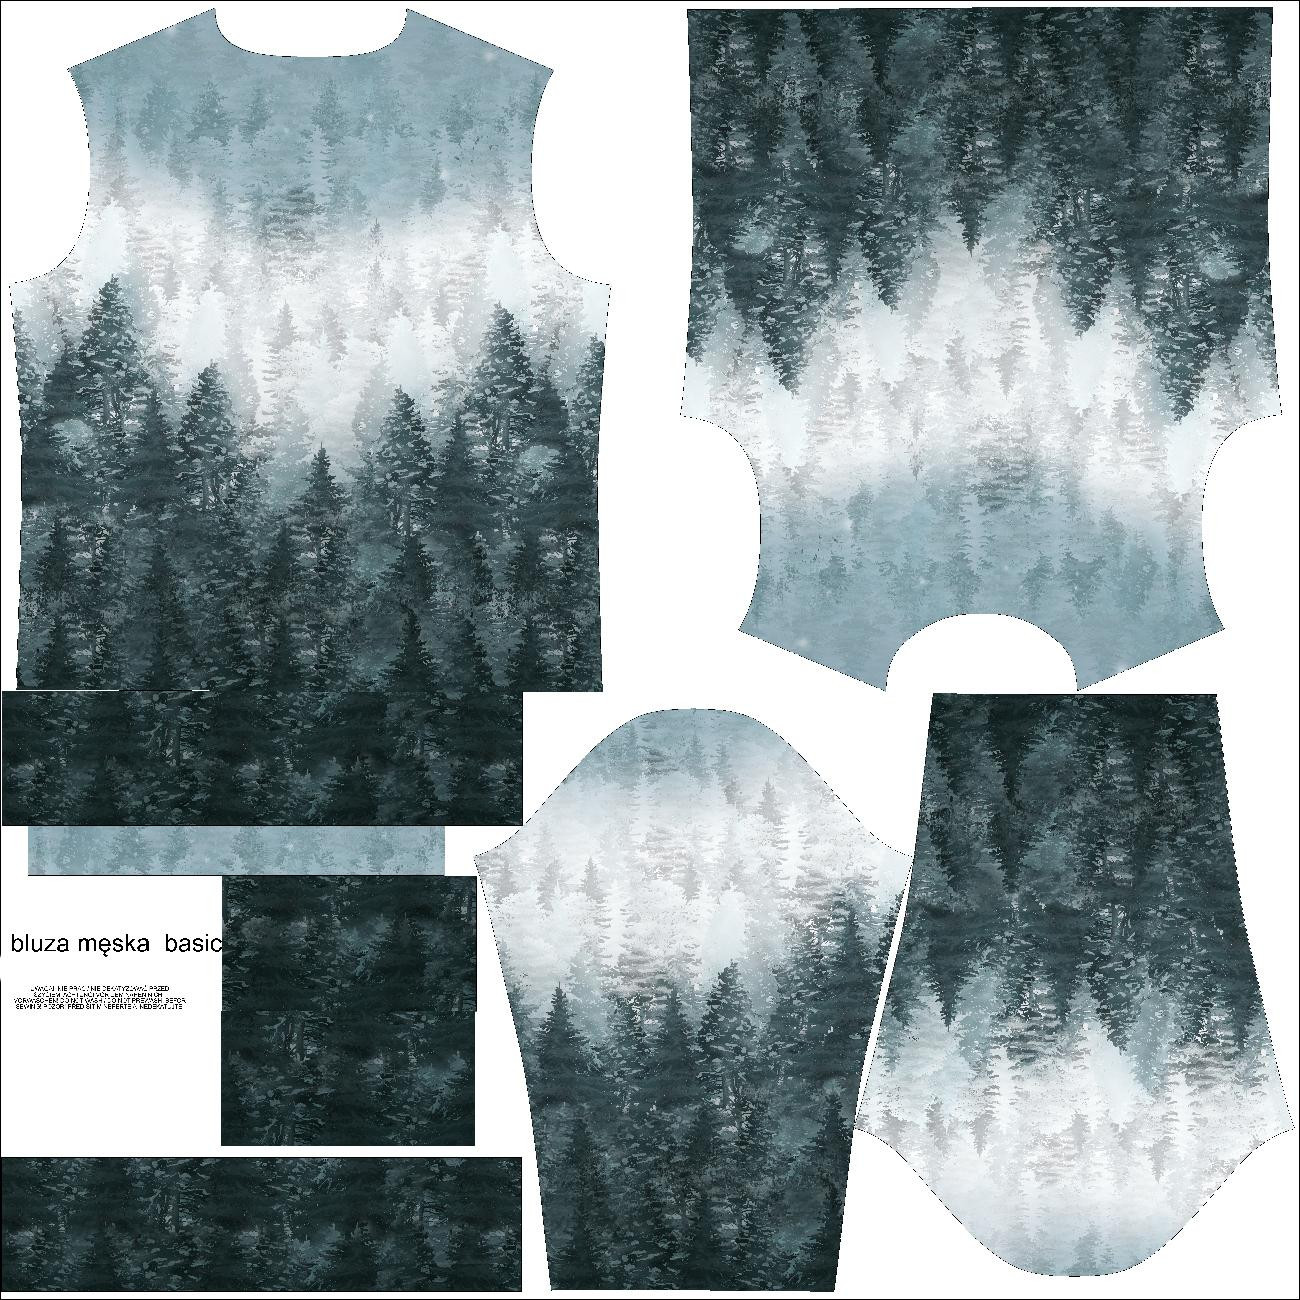 MEN’S SWEATSHIRT (OREGON) BASIC - FORREST OMBRE (WINTER IN THE MOUNTAIN) - sewing set